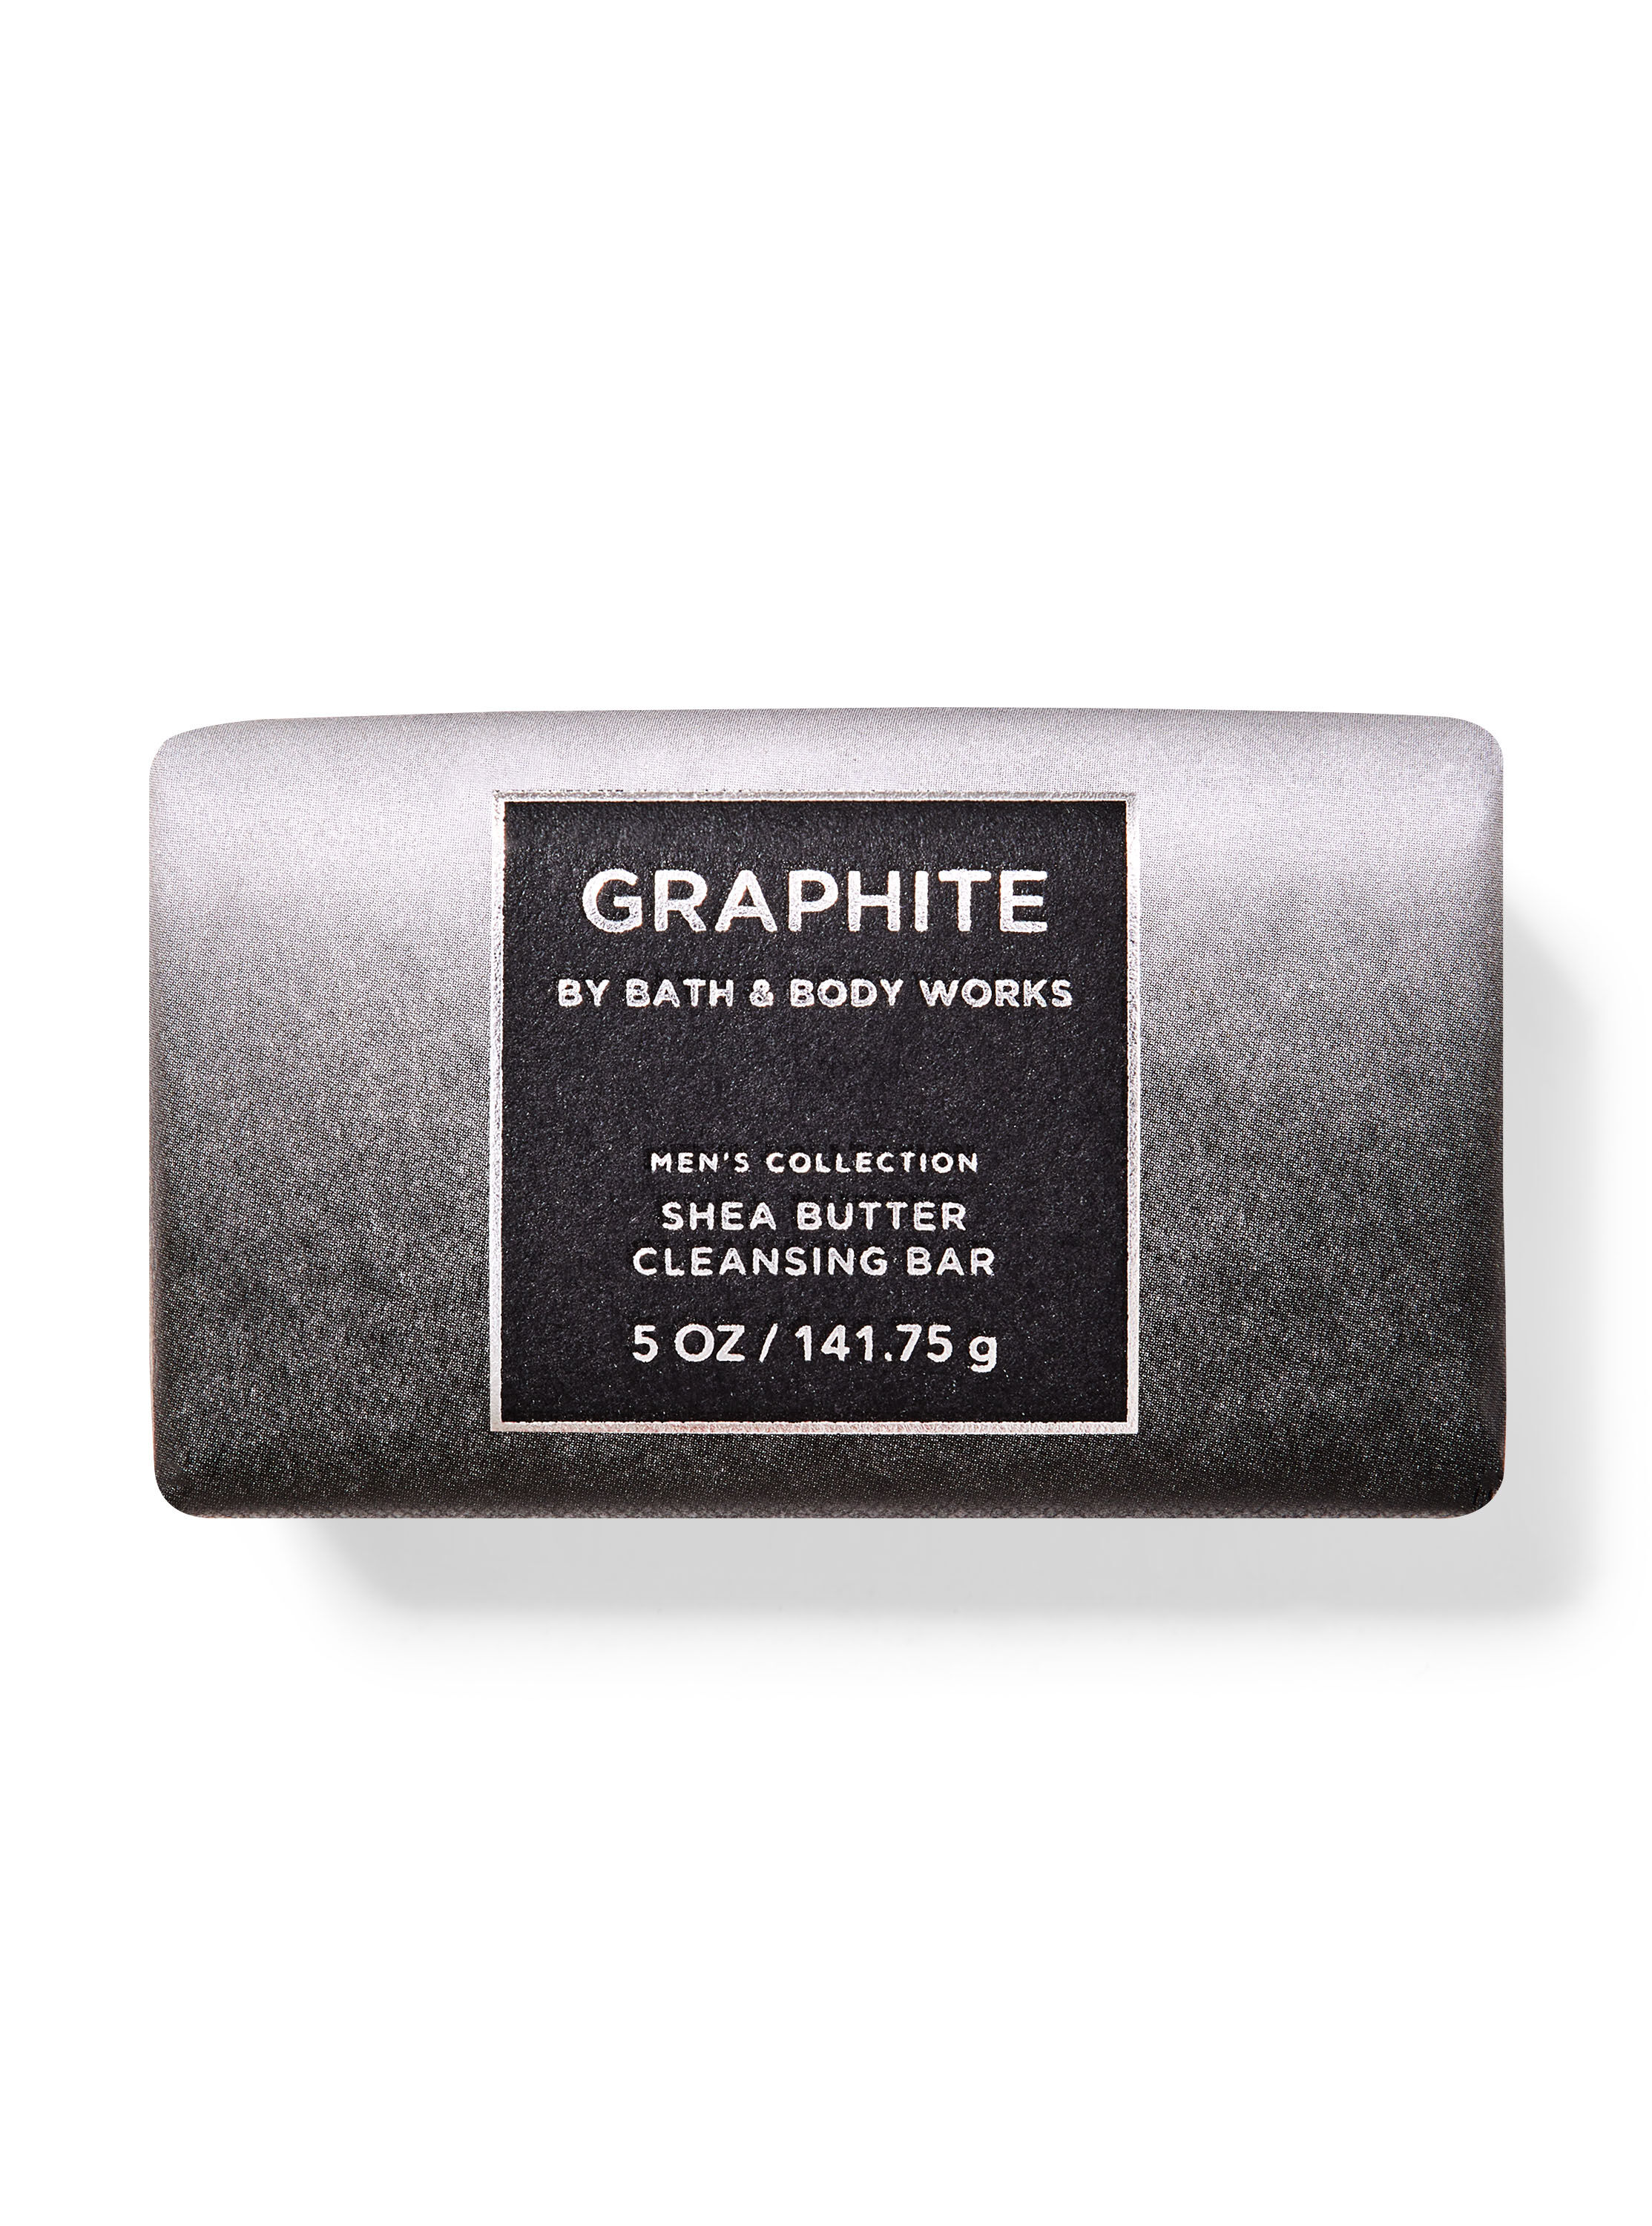 Graphite Shea Butter Cleansing Bar